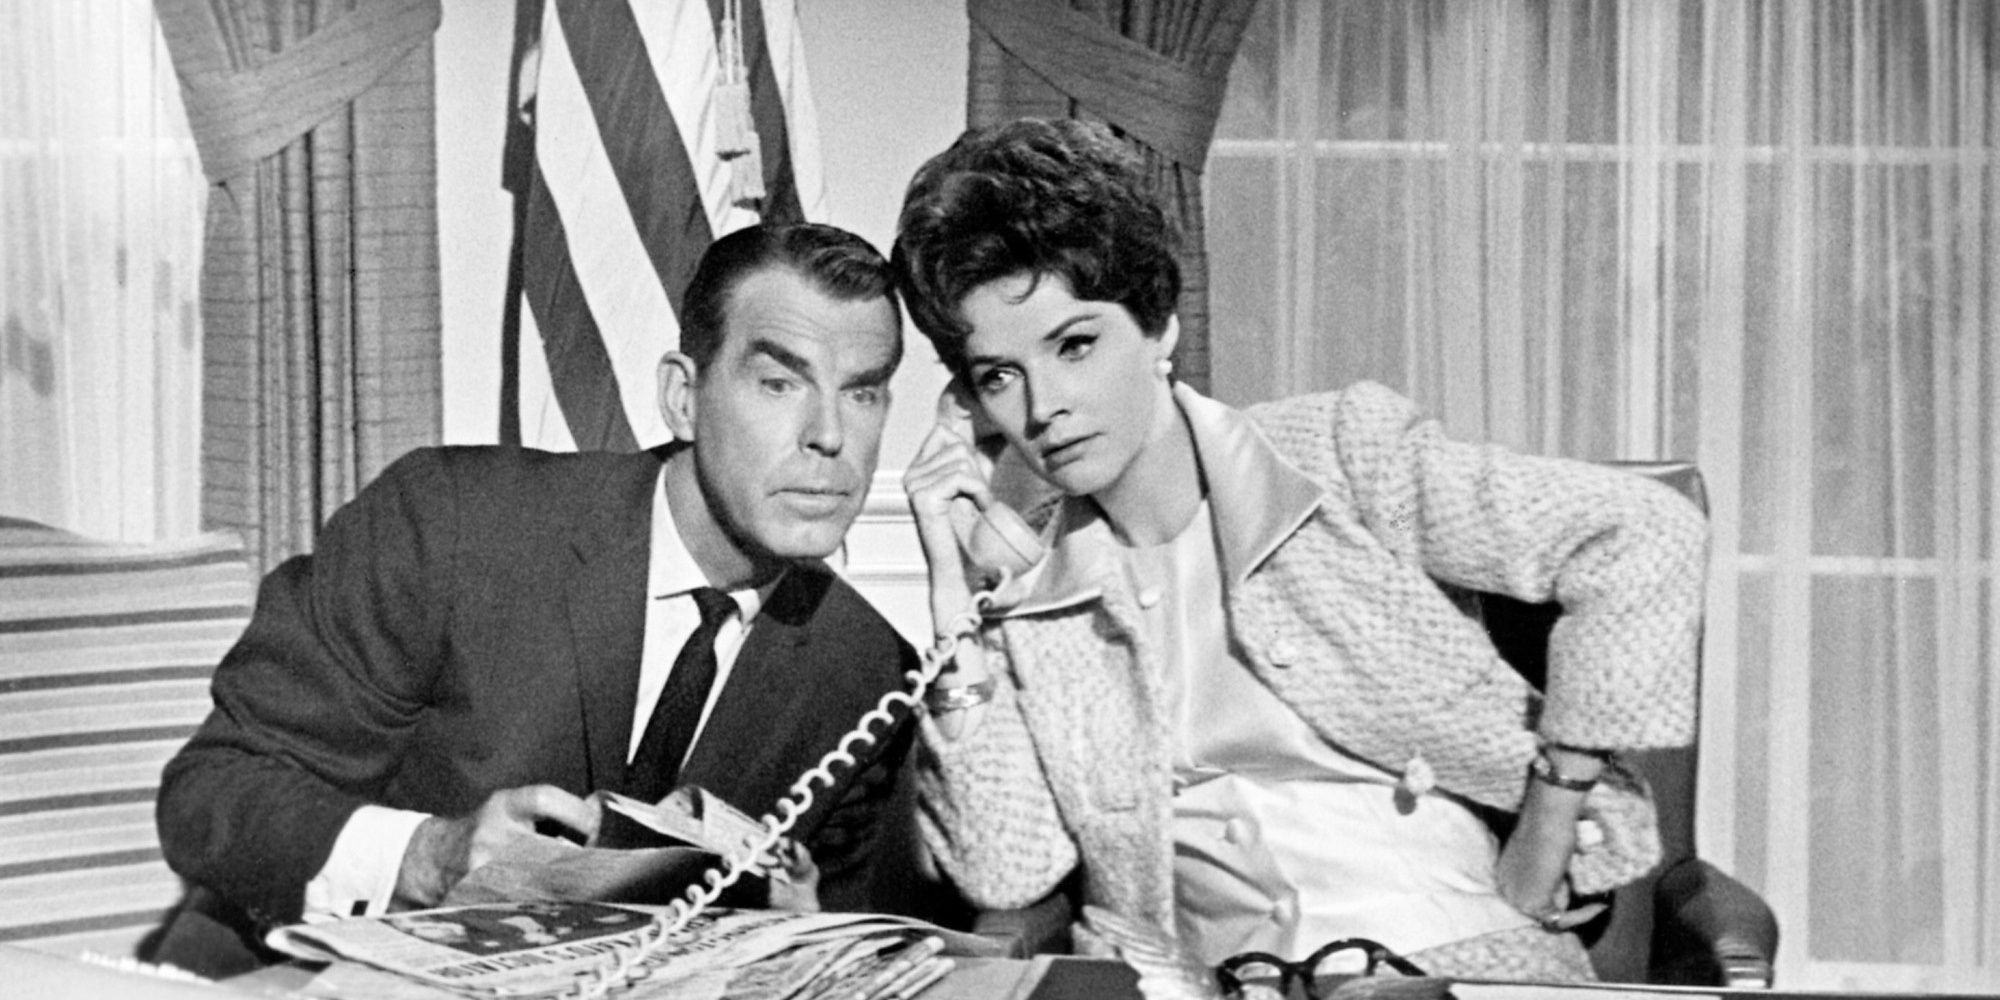 Fred MacMurray and Polly Bergen on the phone